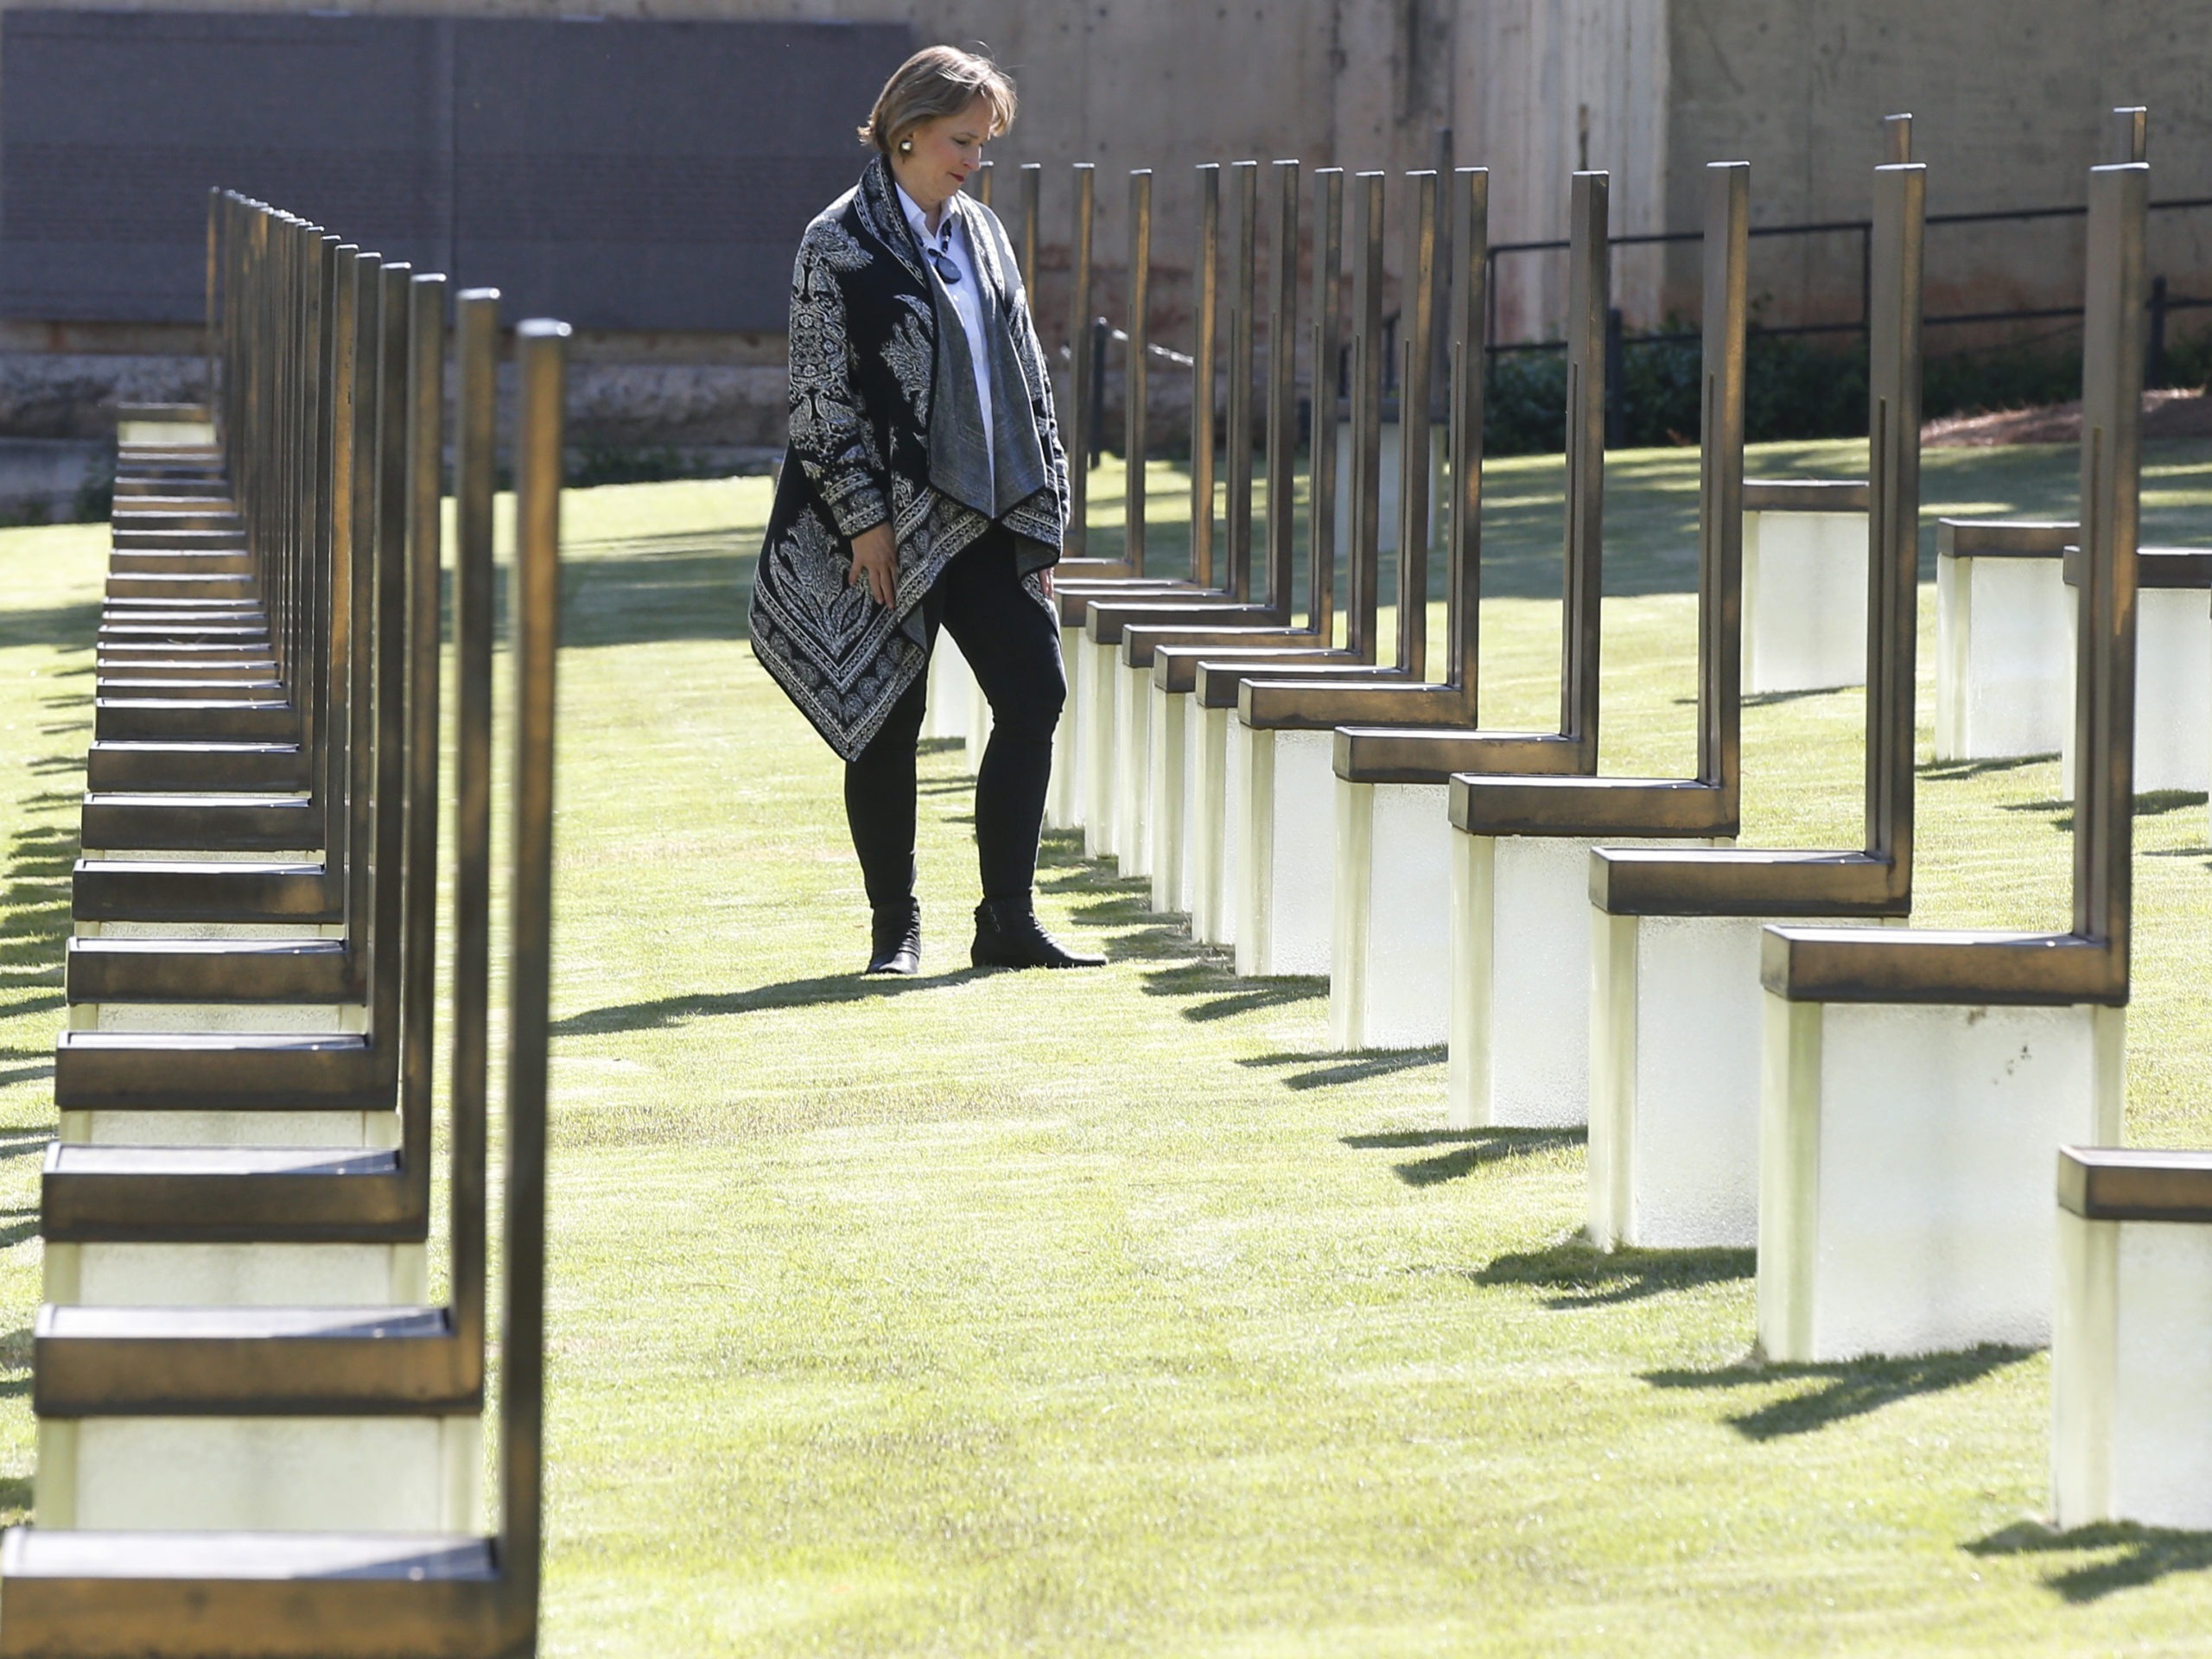 Lynne Gist stands at her sister's chair in the Field of Empty Chairs at the Oklahoma City National Memorial and Museum